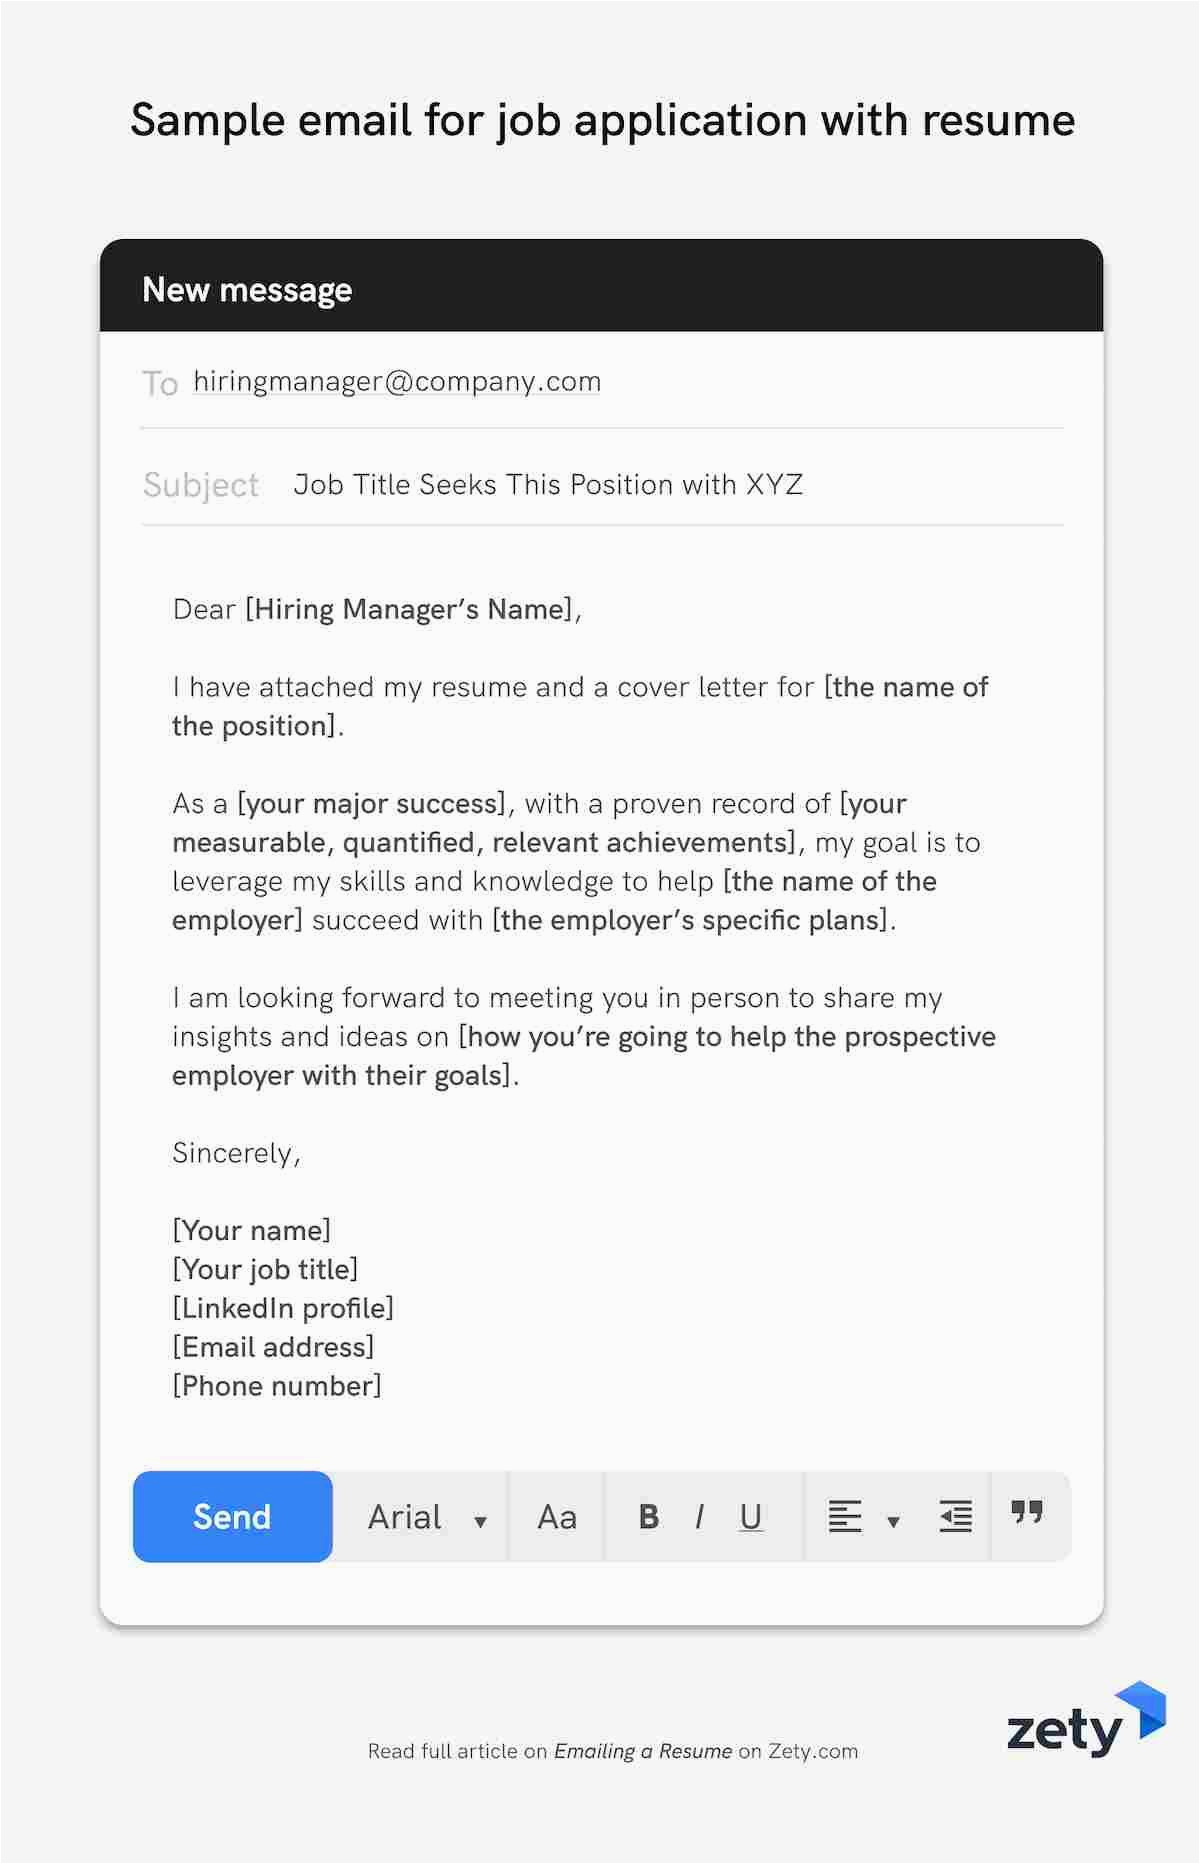 Sample Body Of Email when Sending Resume How to Email A Resume to An Employer 12 Email Examples